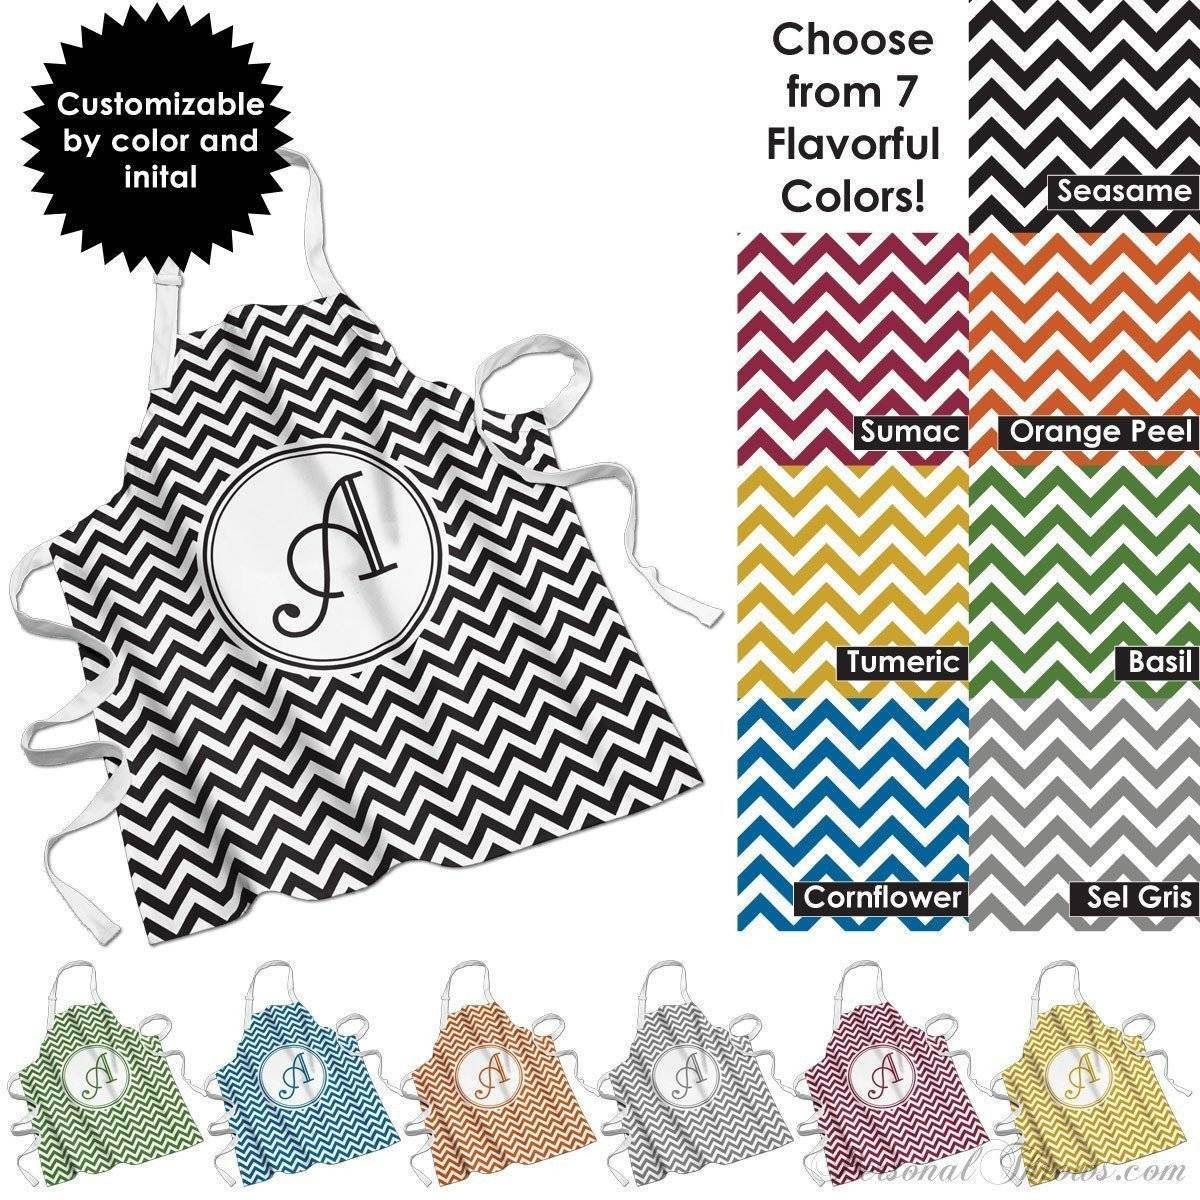 Photo Apparel,Monogrammed Gifts,Other Products - Chevron Monogrammed Apron - 27" X 31"